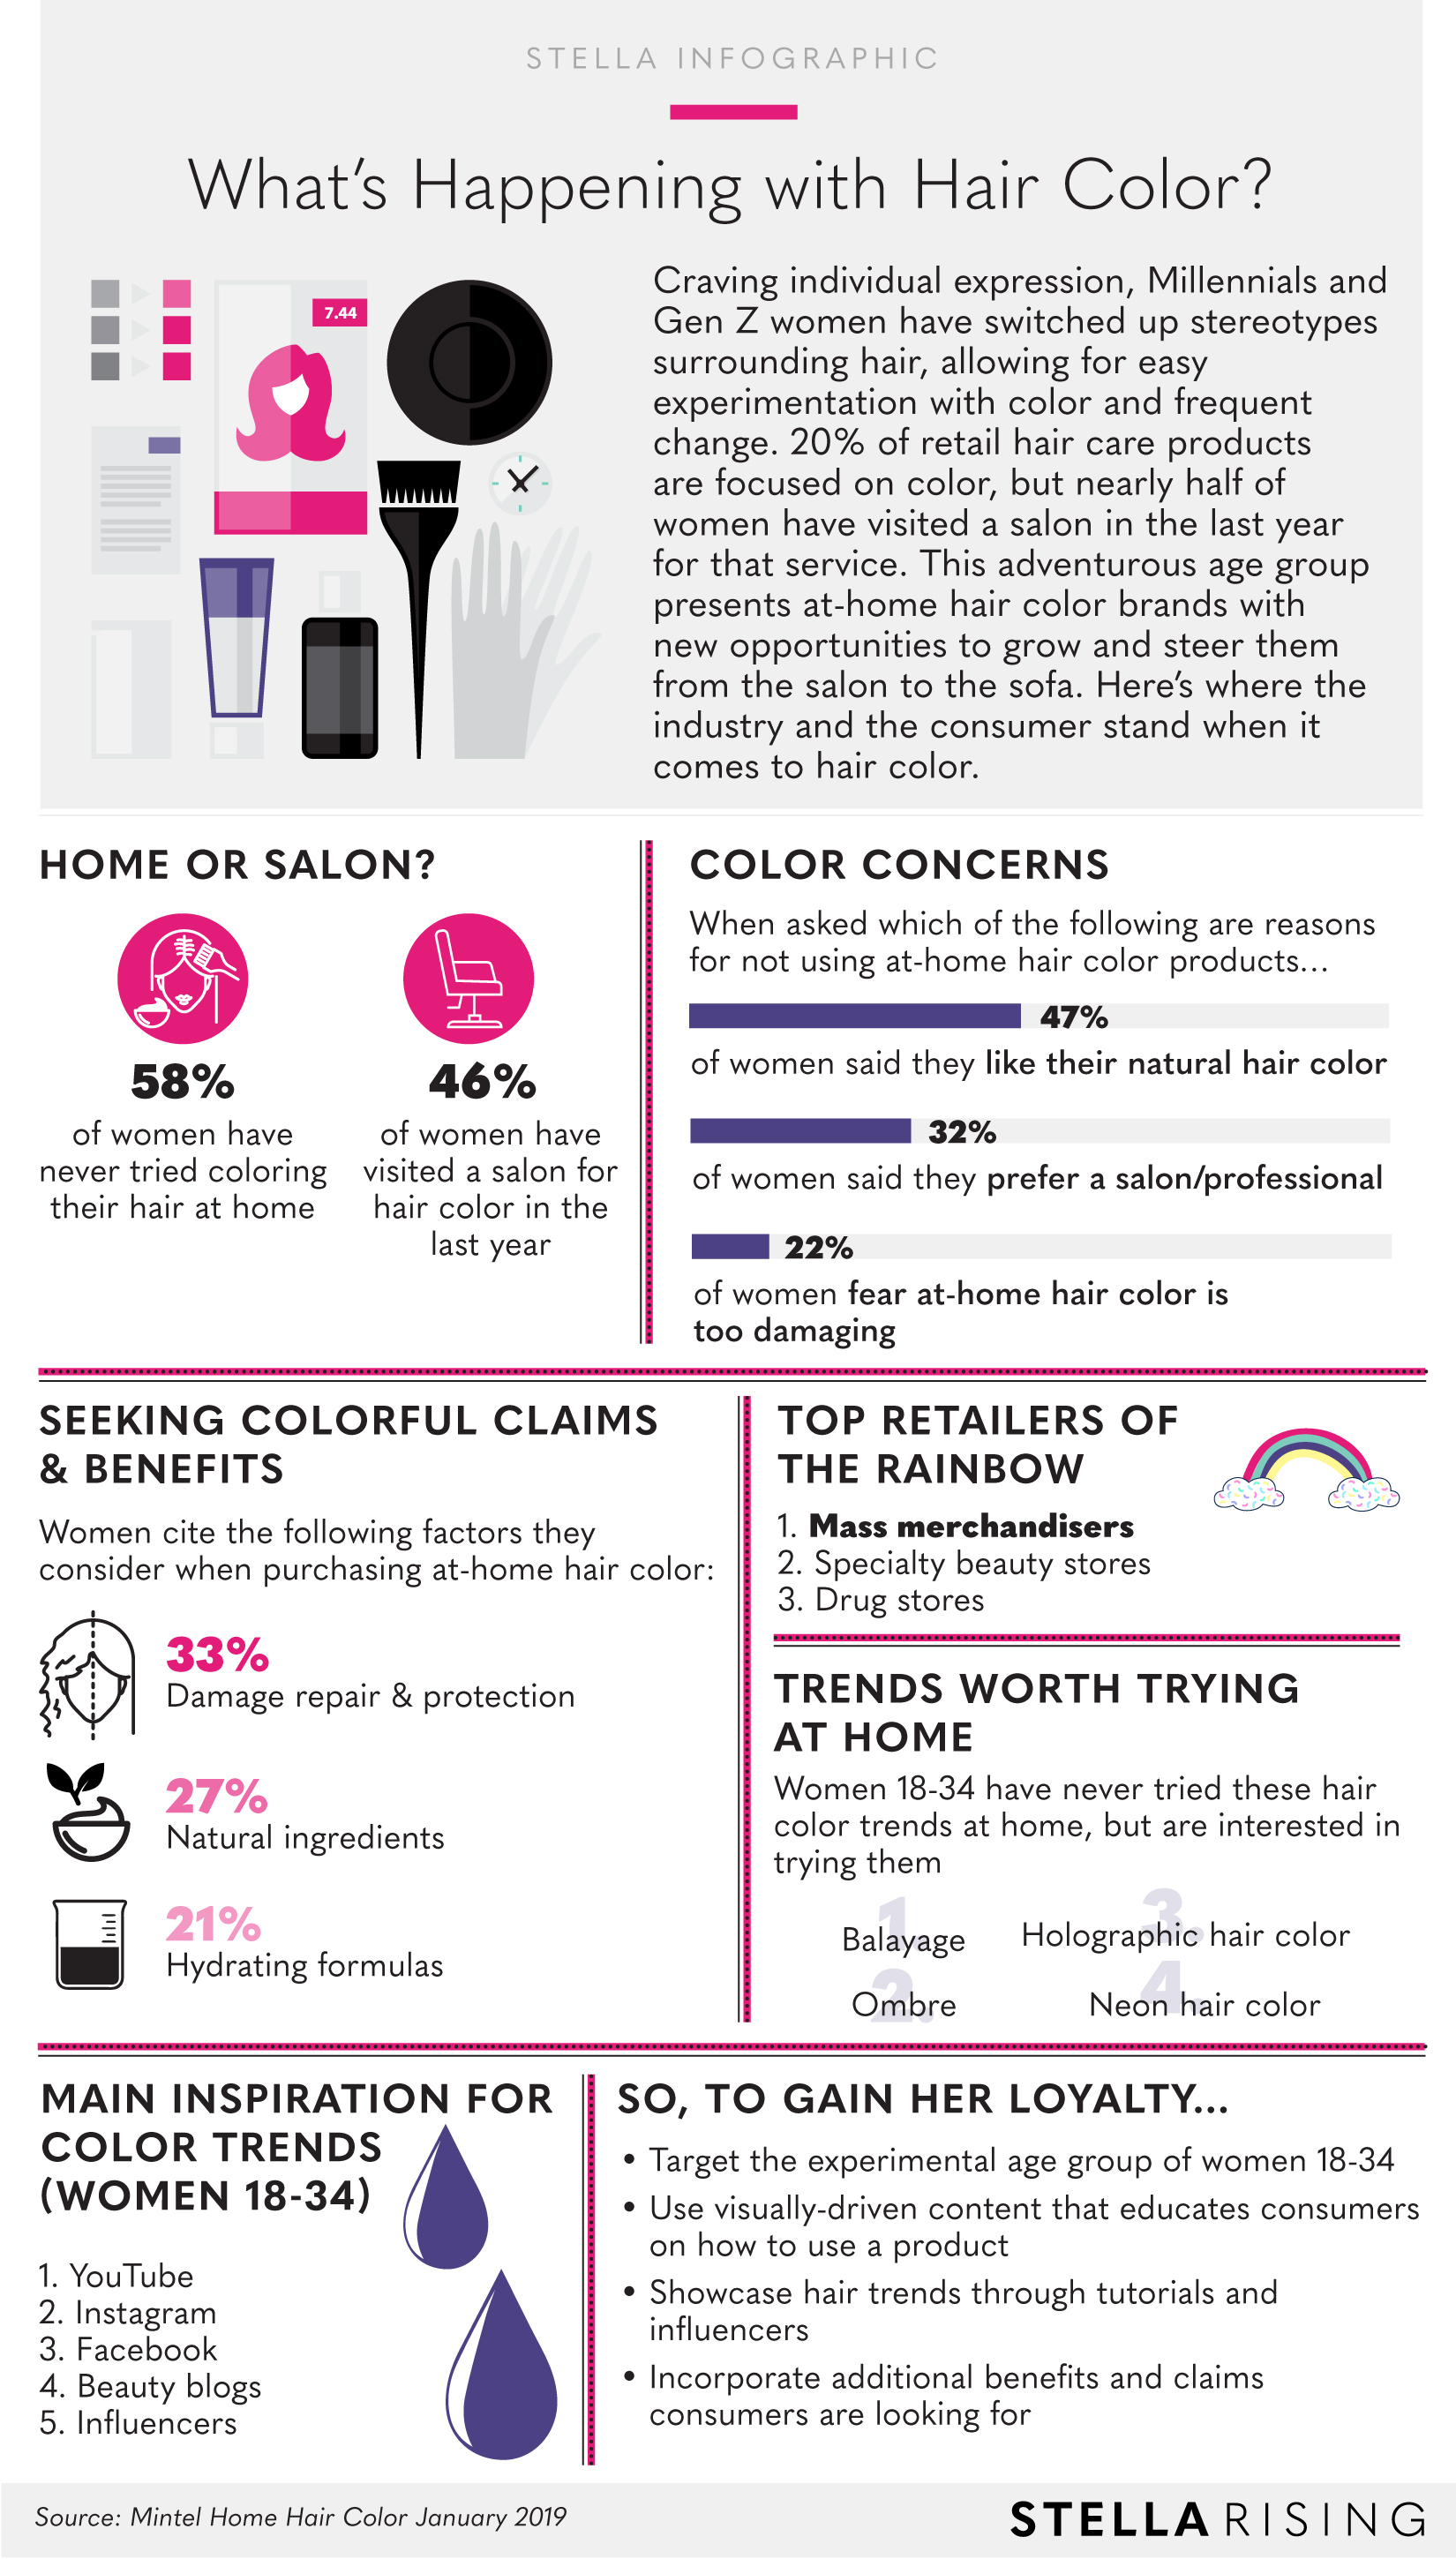 What'sHappeninginHairColor_Infographic